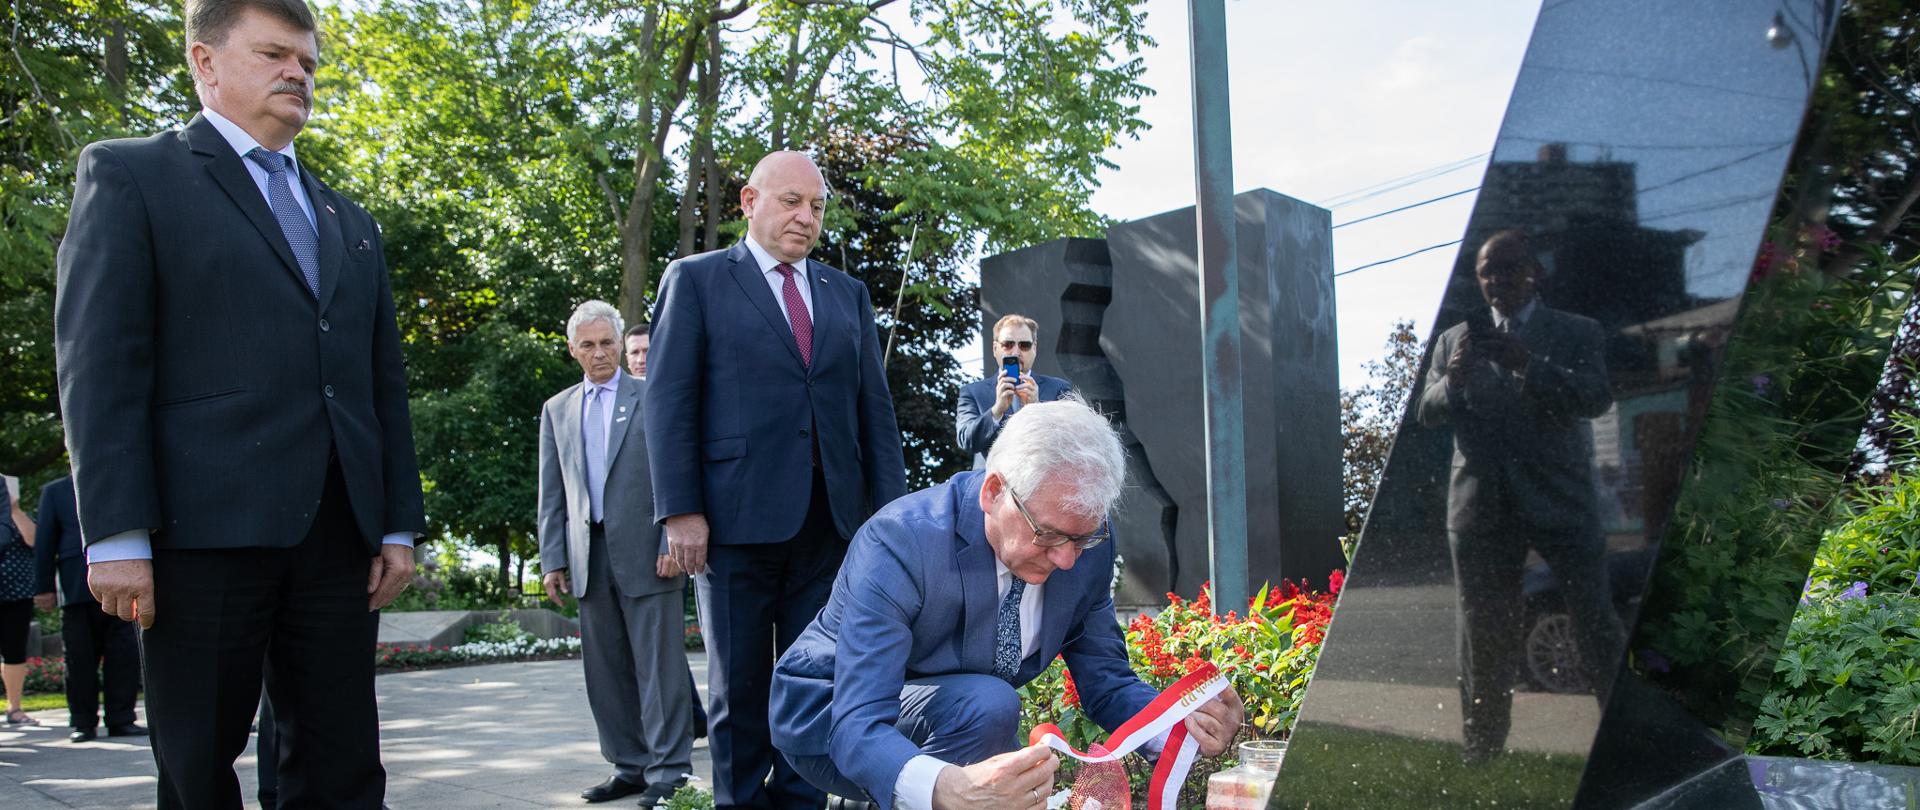 Foreign Minister Jacek Czaputowicz meets with Polish community in Canada